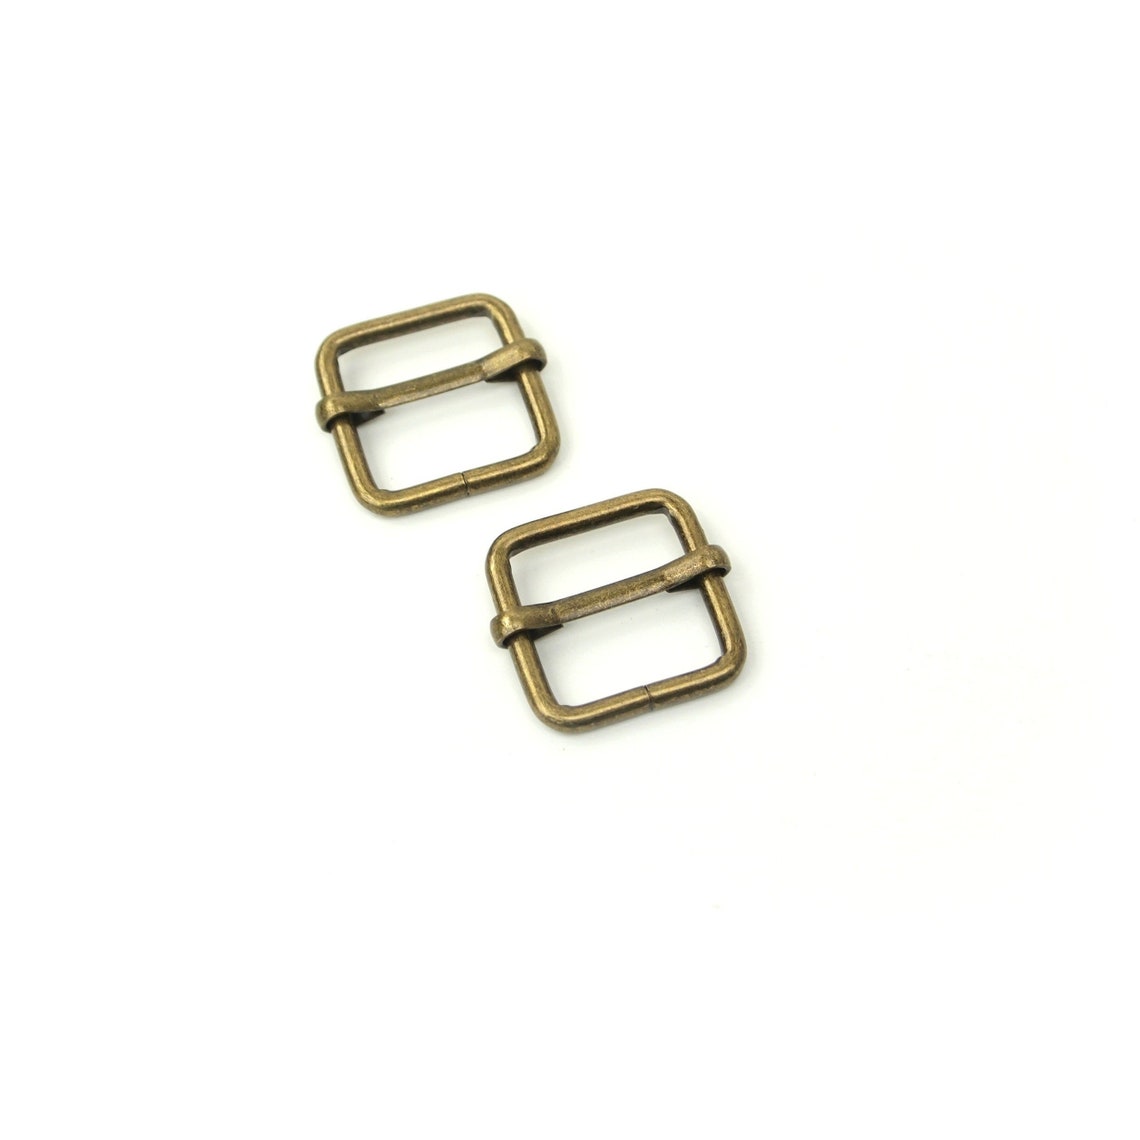 Two Slider Buckles 3/4 - Etsy